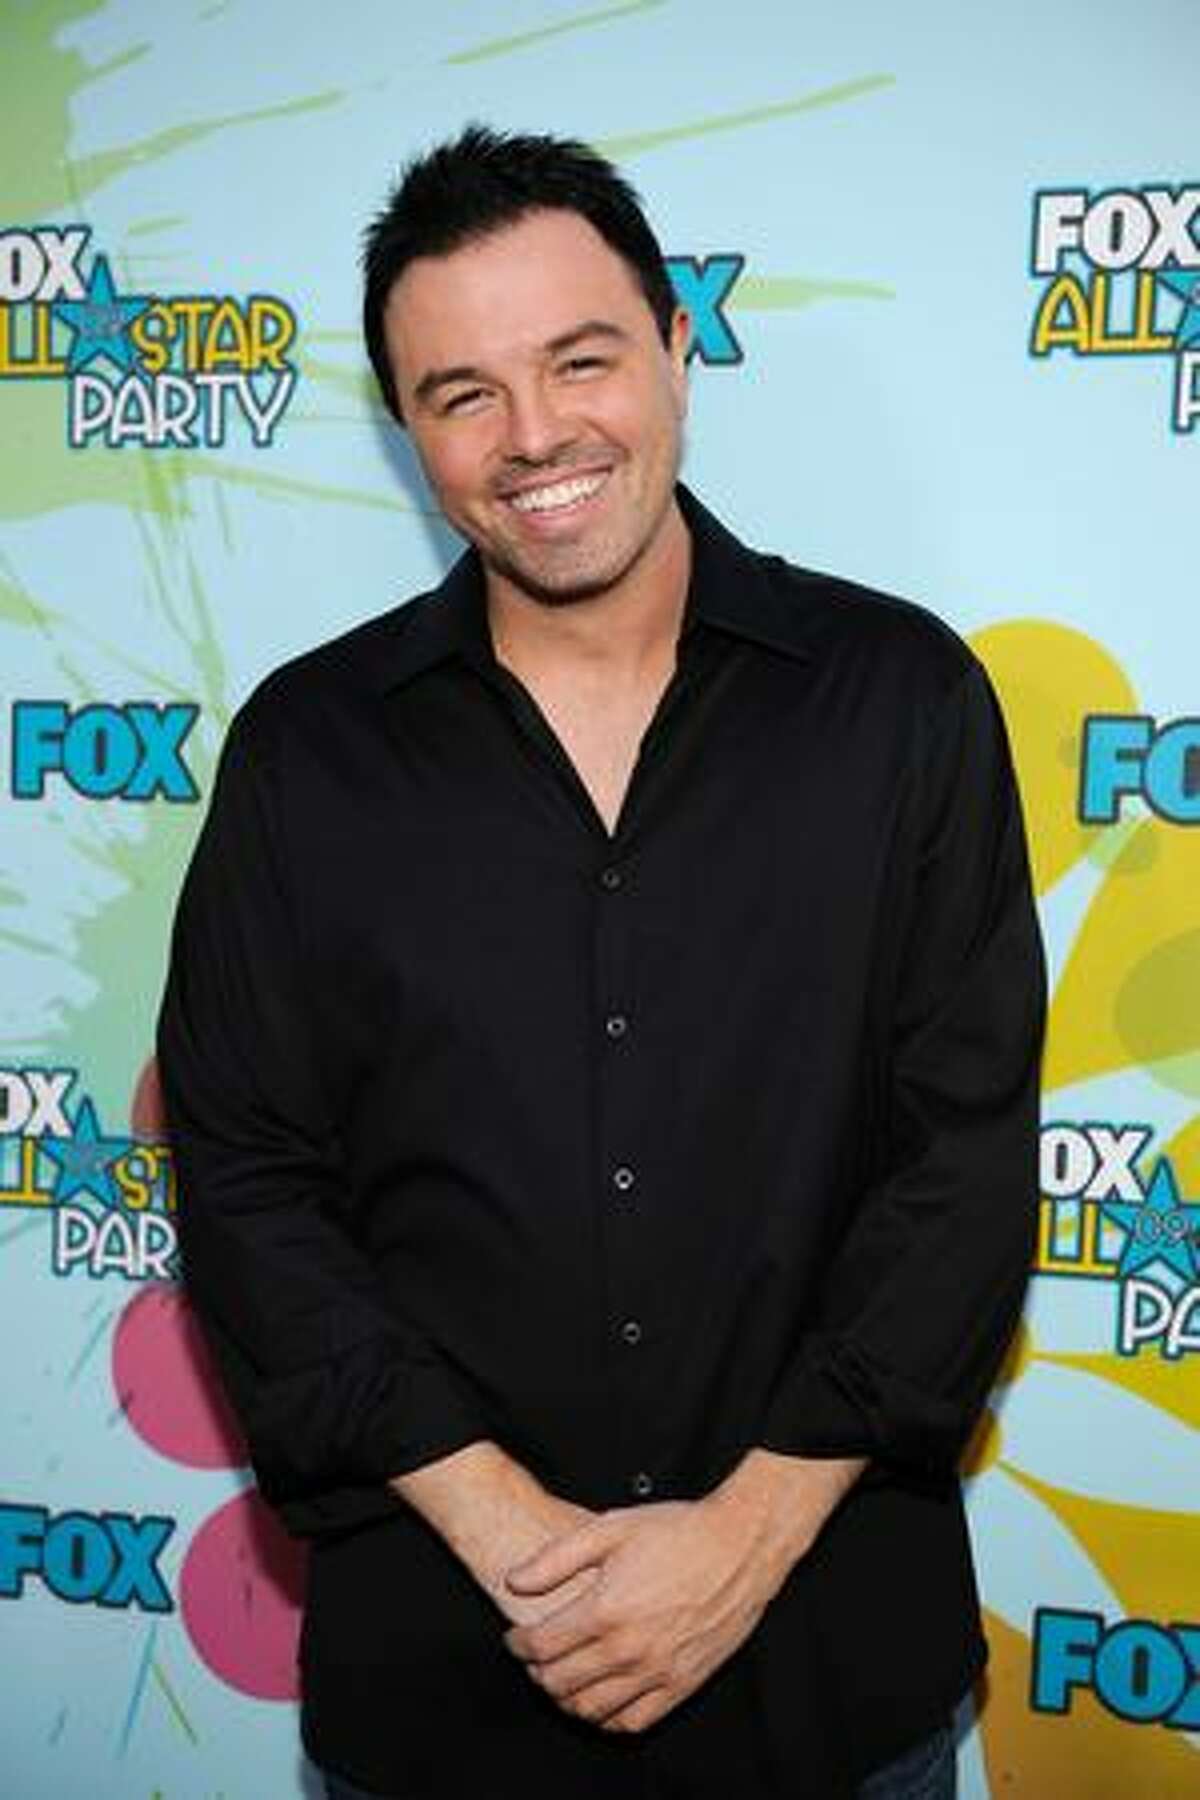 Writer/actor Seth MacFarlane attends the 2009 FOX All-Star Party held at the Langham Hotel in Pasadena, California.